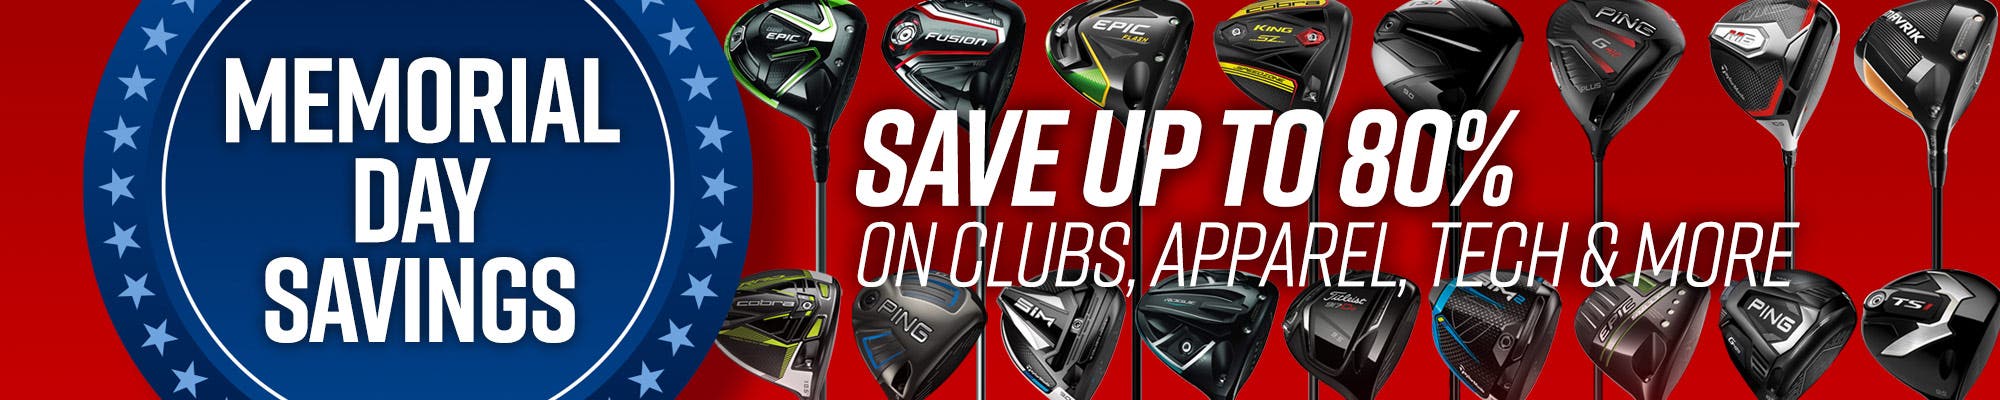 Memorial Day Savings | Save up to 80% on clubs, apparel, tech & more